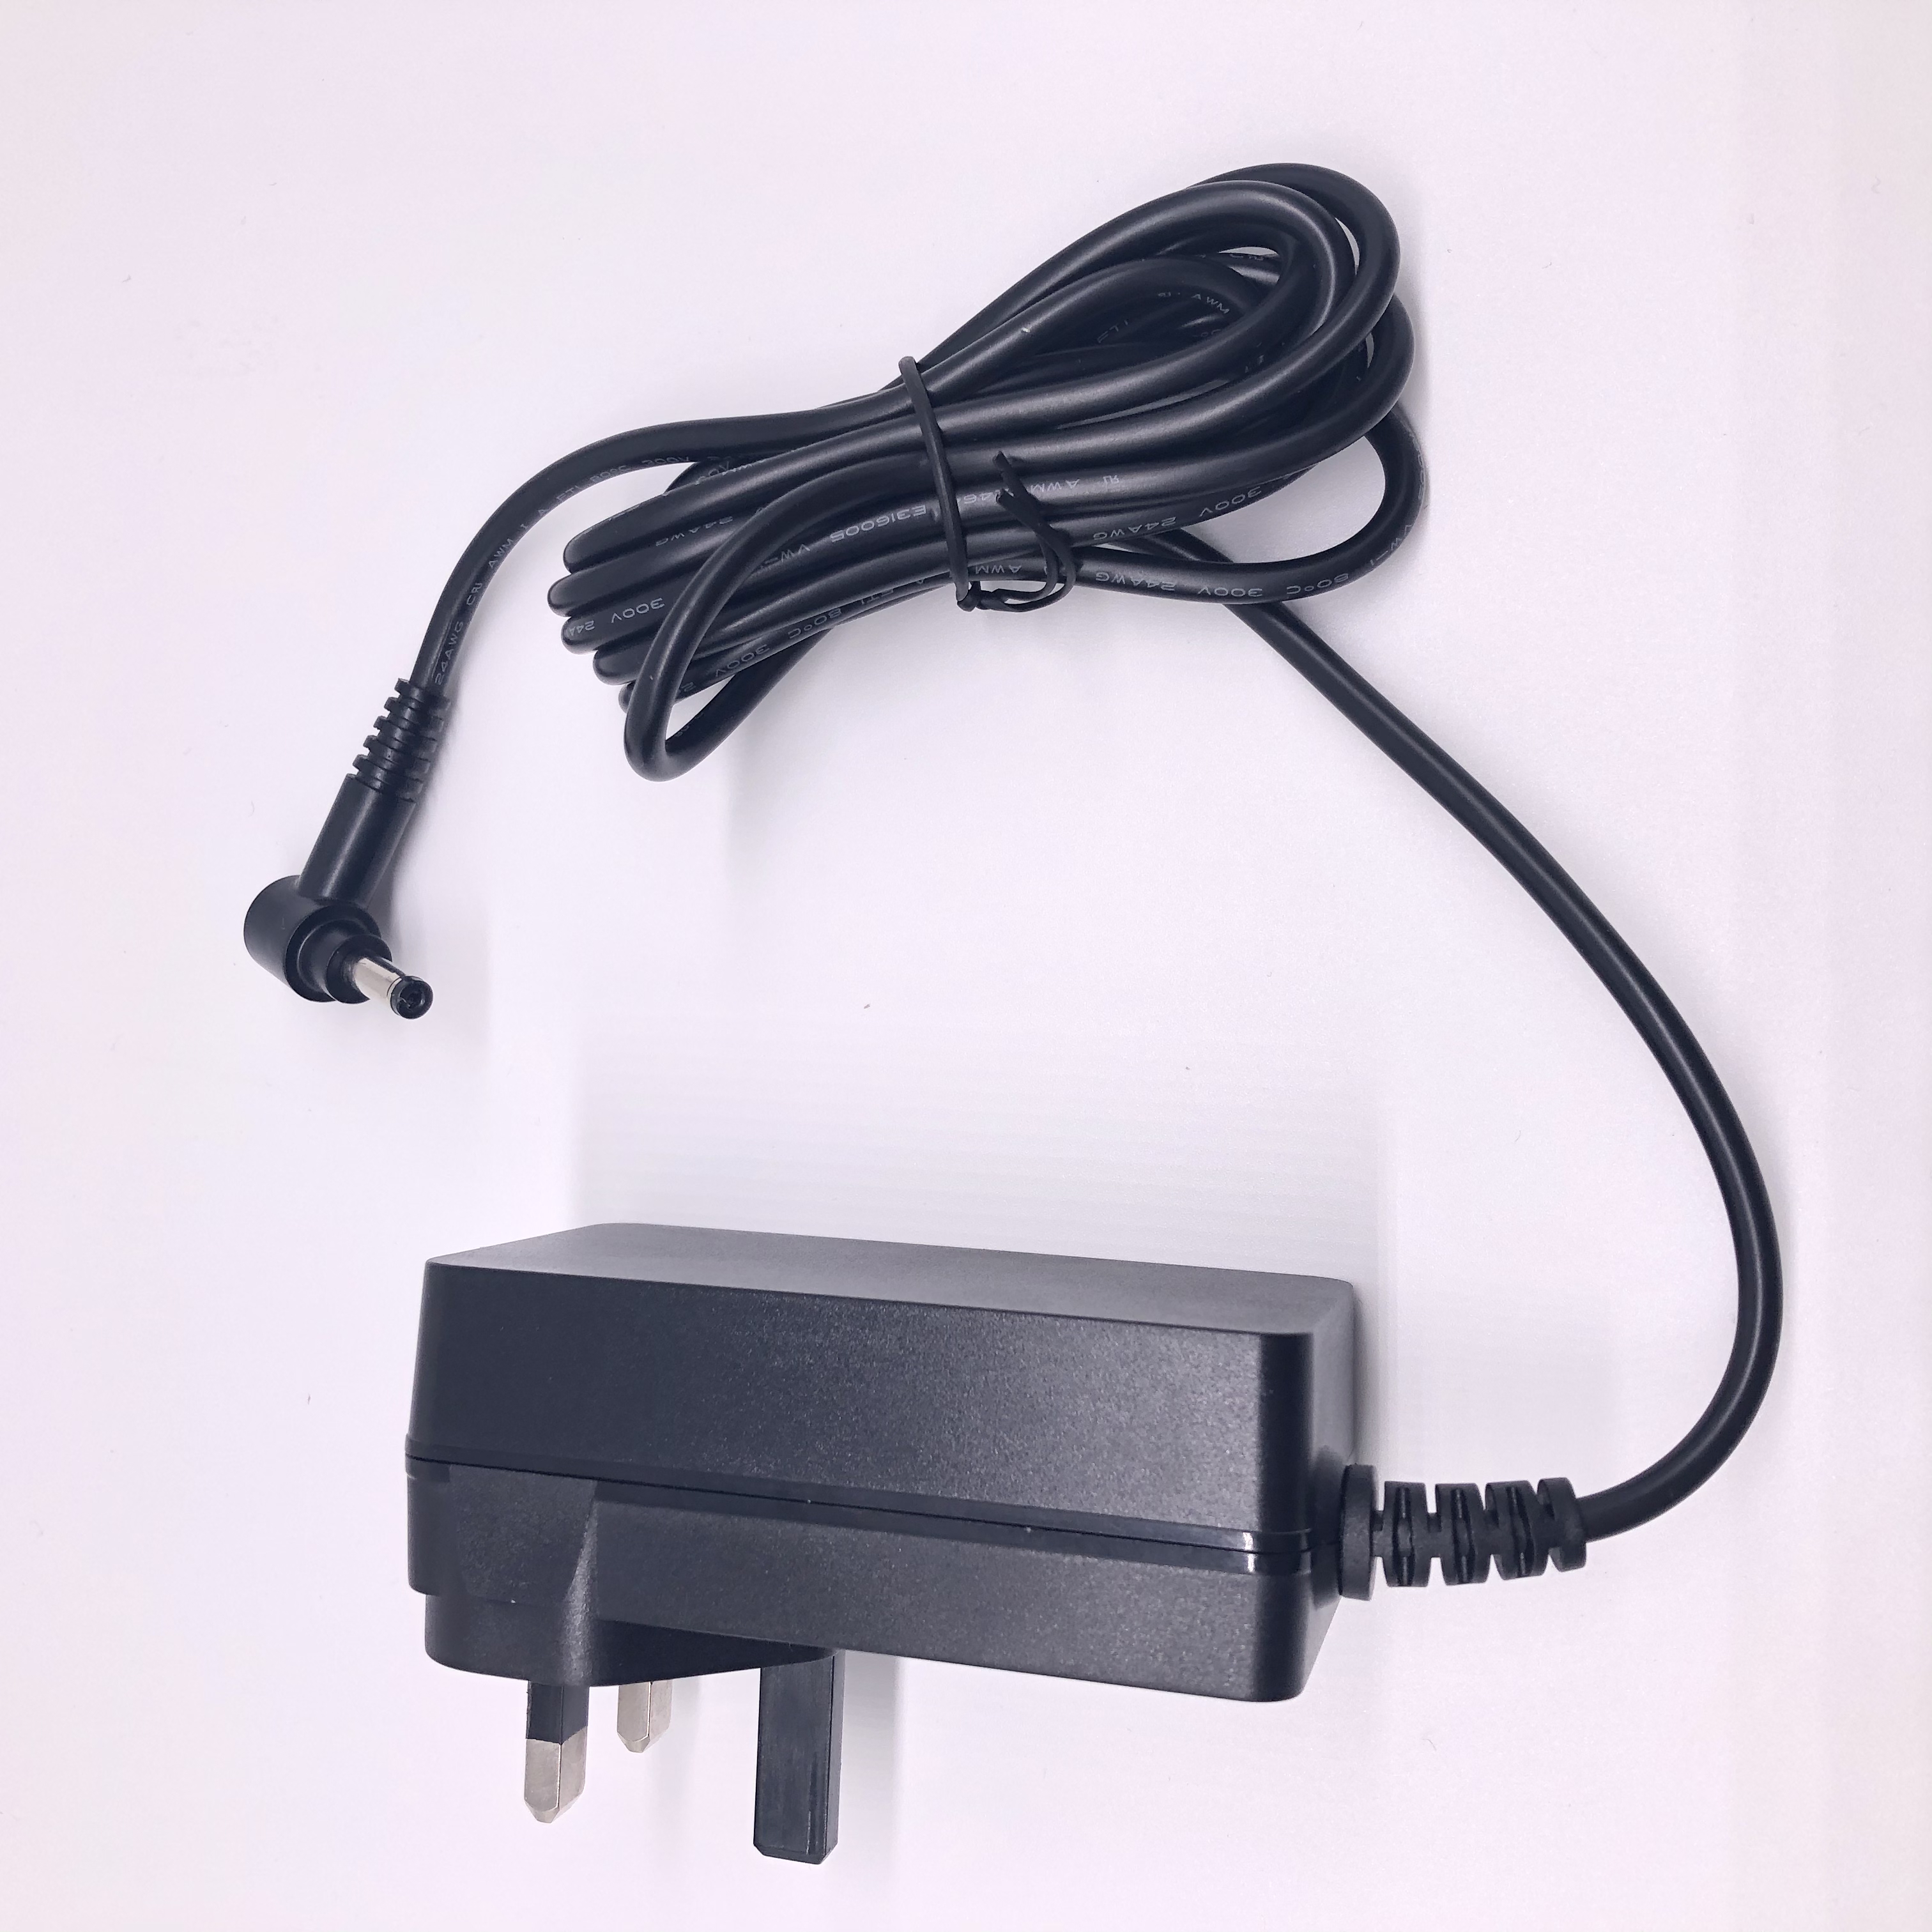 DC 30V 500MA power adaptor charger for Bosch Athlet 1200343712006118 charger